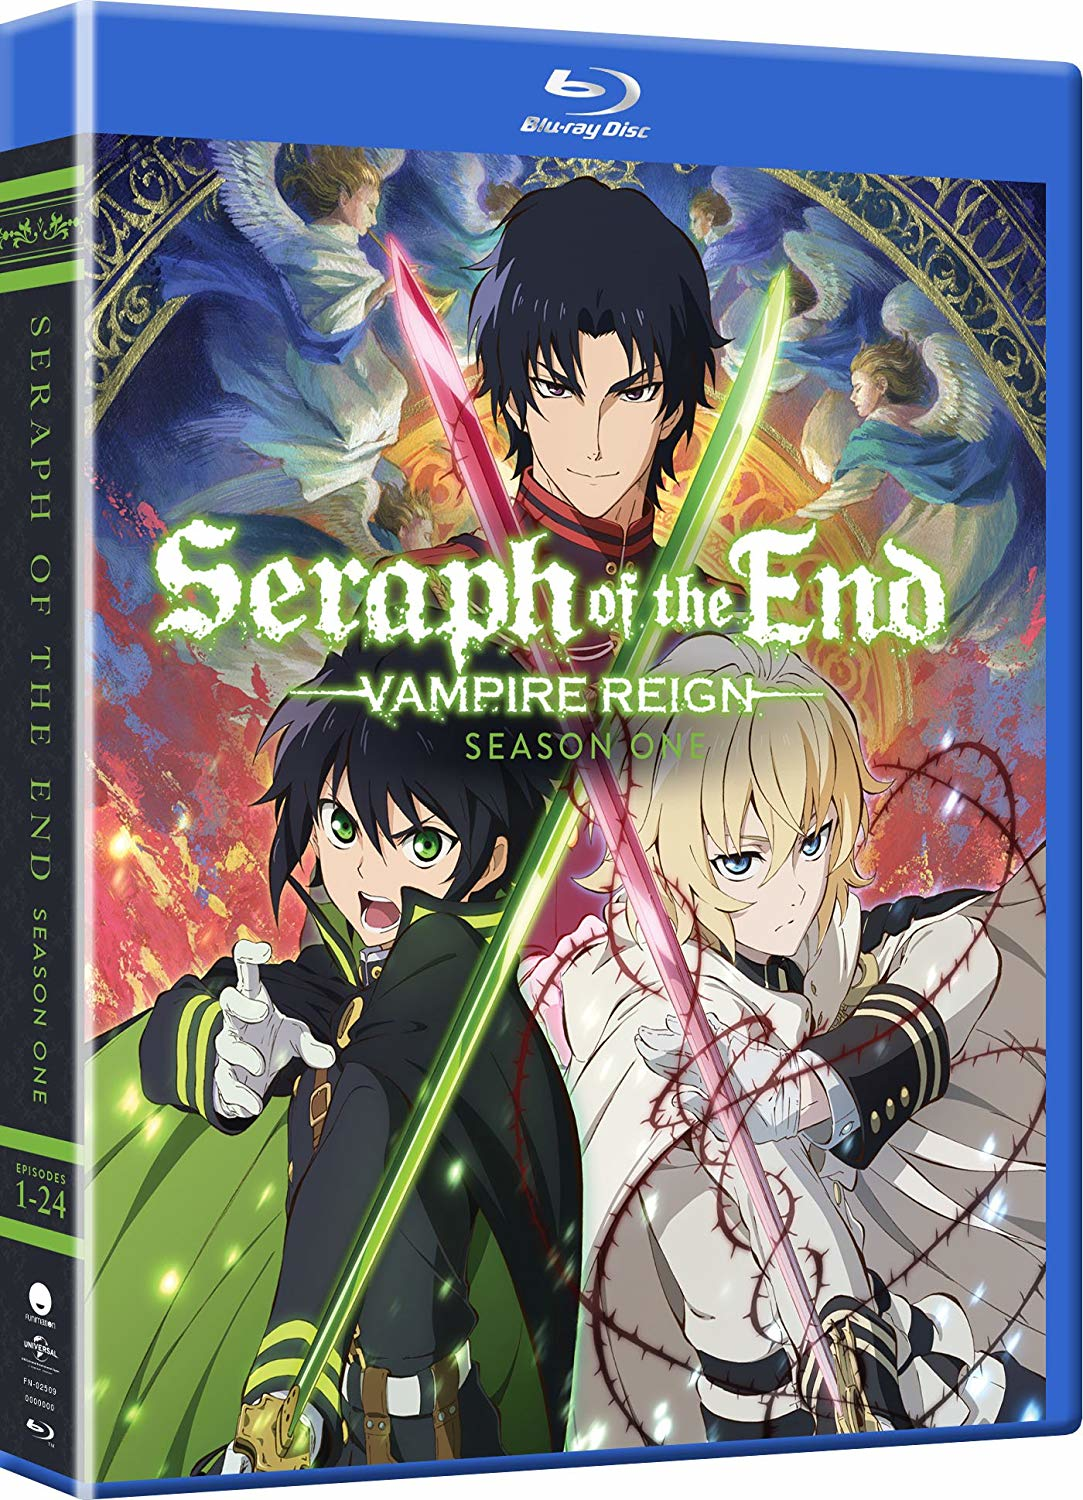 Seraph of the End Season One Review (Anime) - Rice Digital